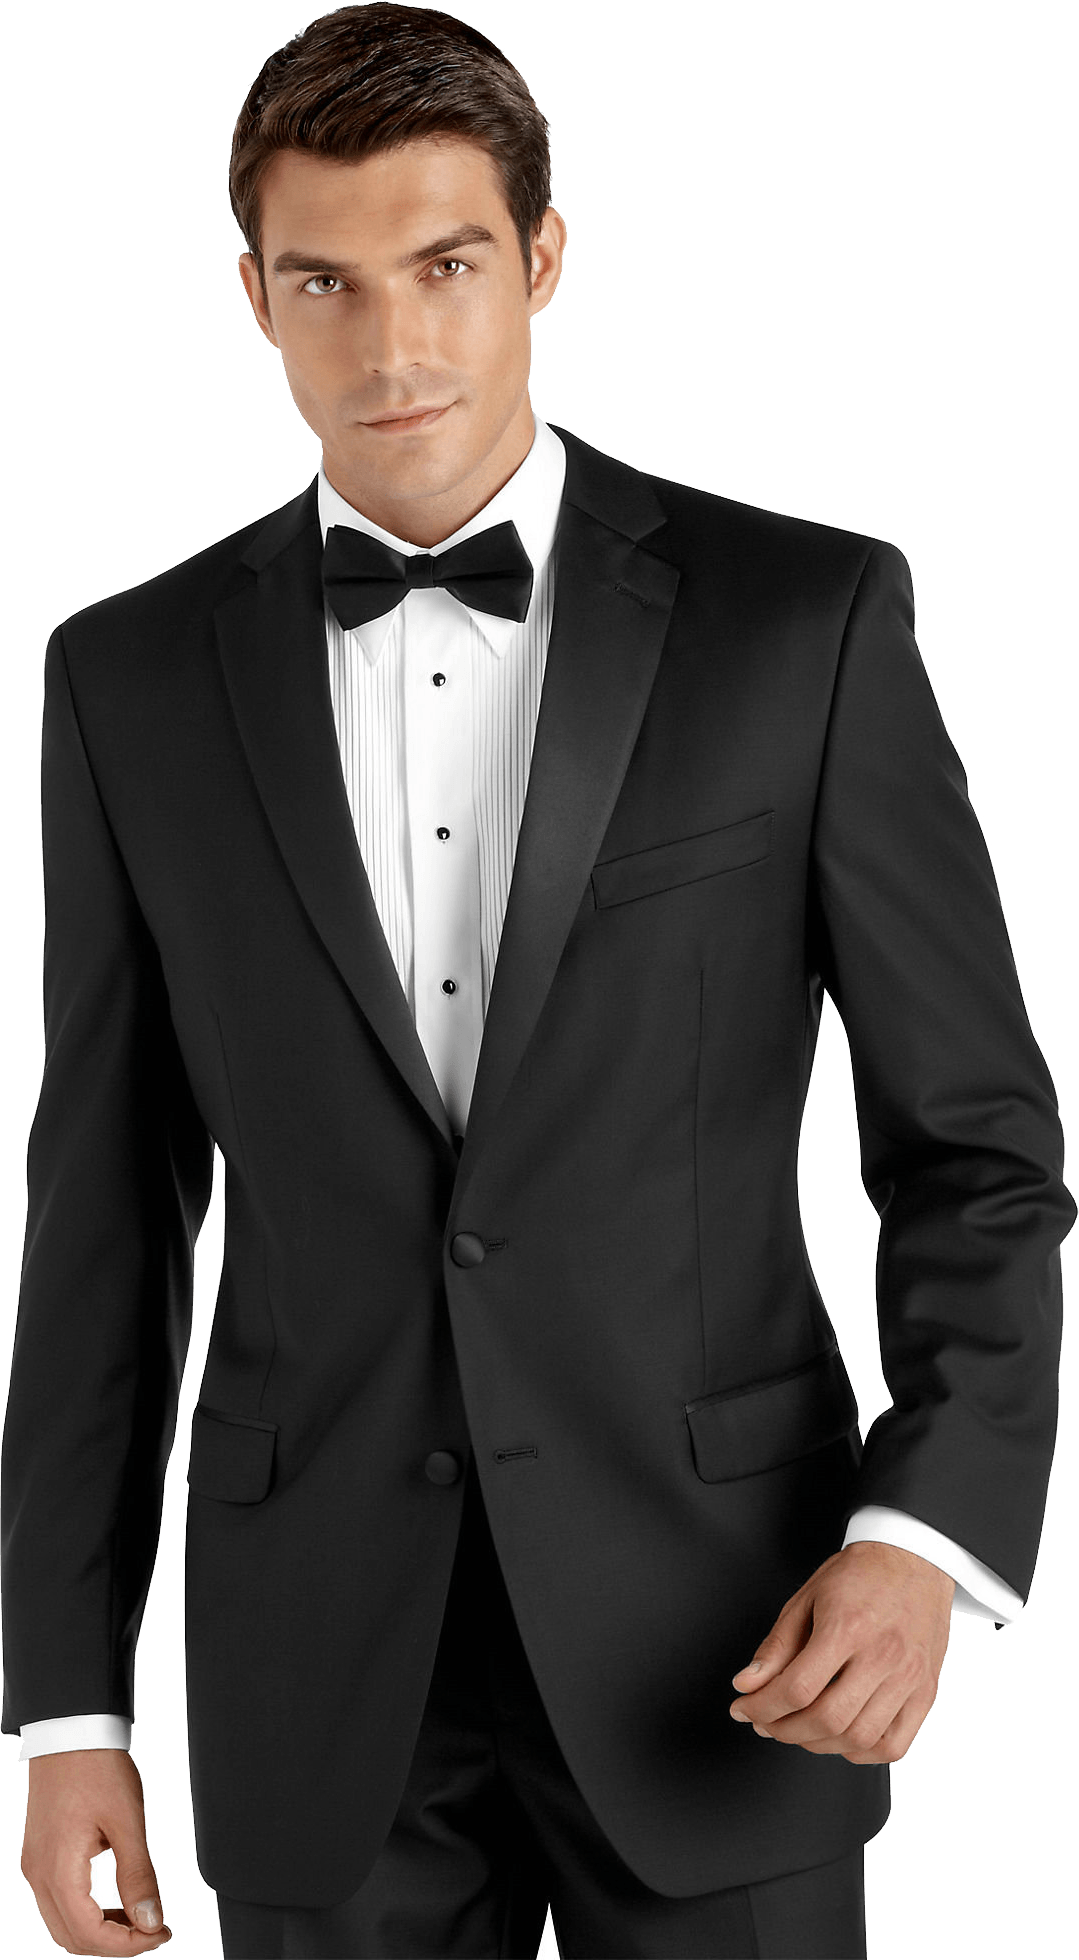 Man In Suit PNG High-Quality Image